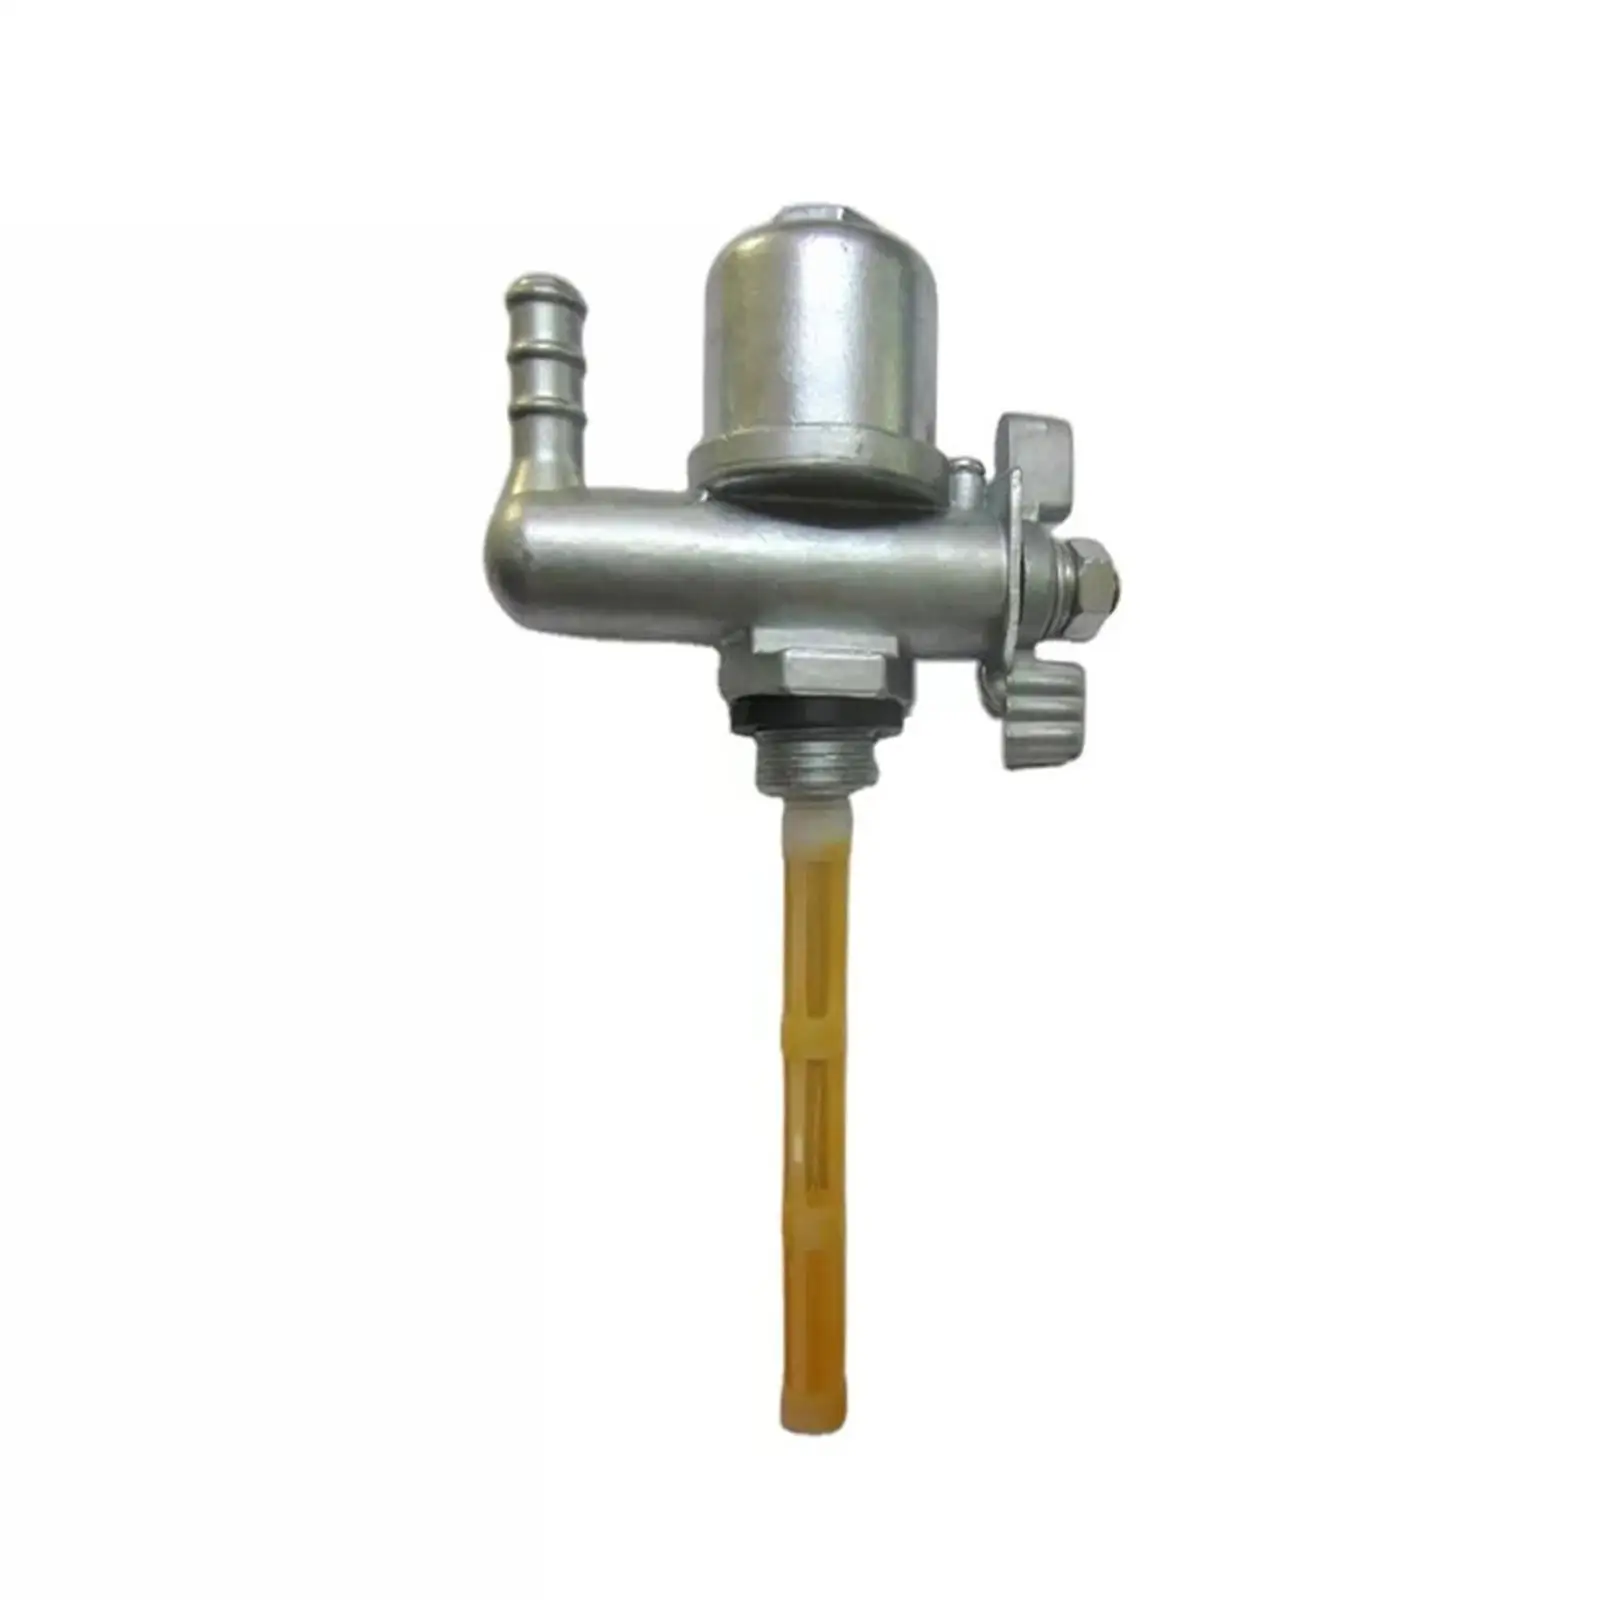 Fuel Gas Tank Switch Valve Petcock for Ruassia Msk Motorcycle Parts